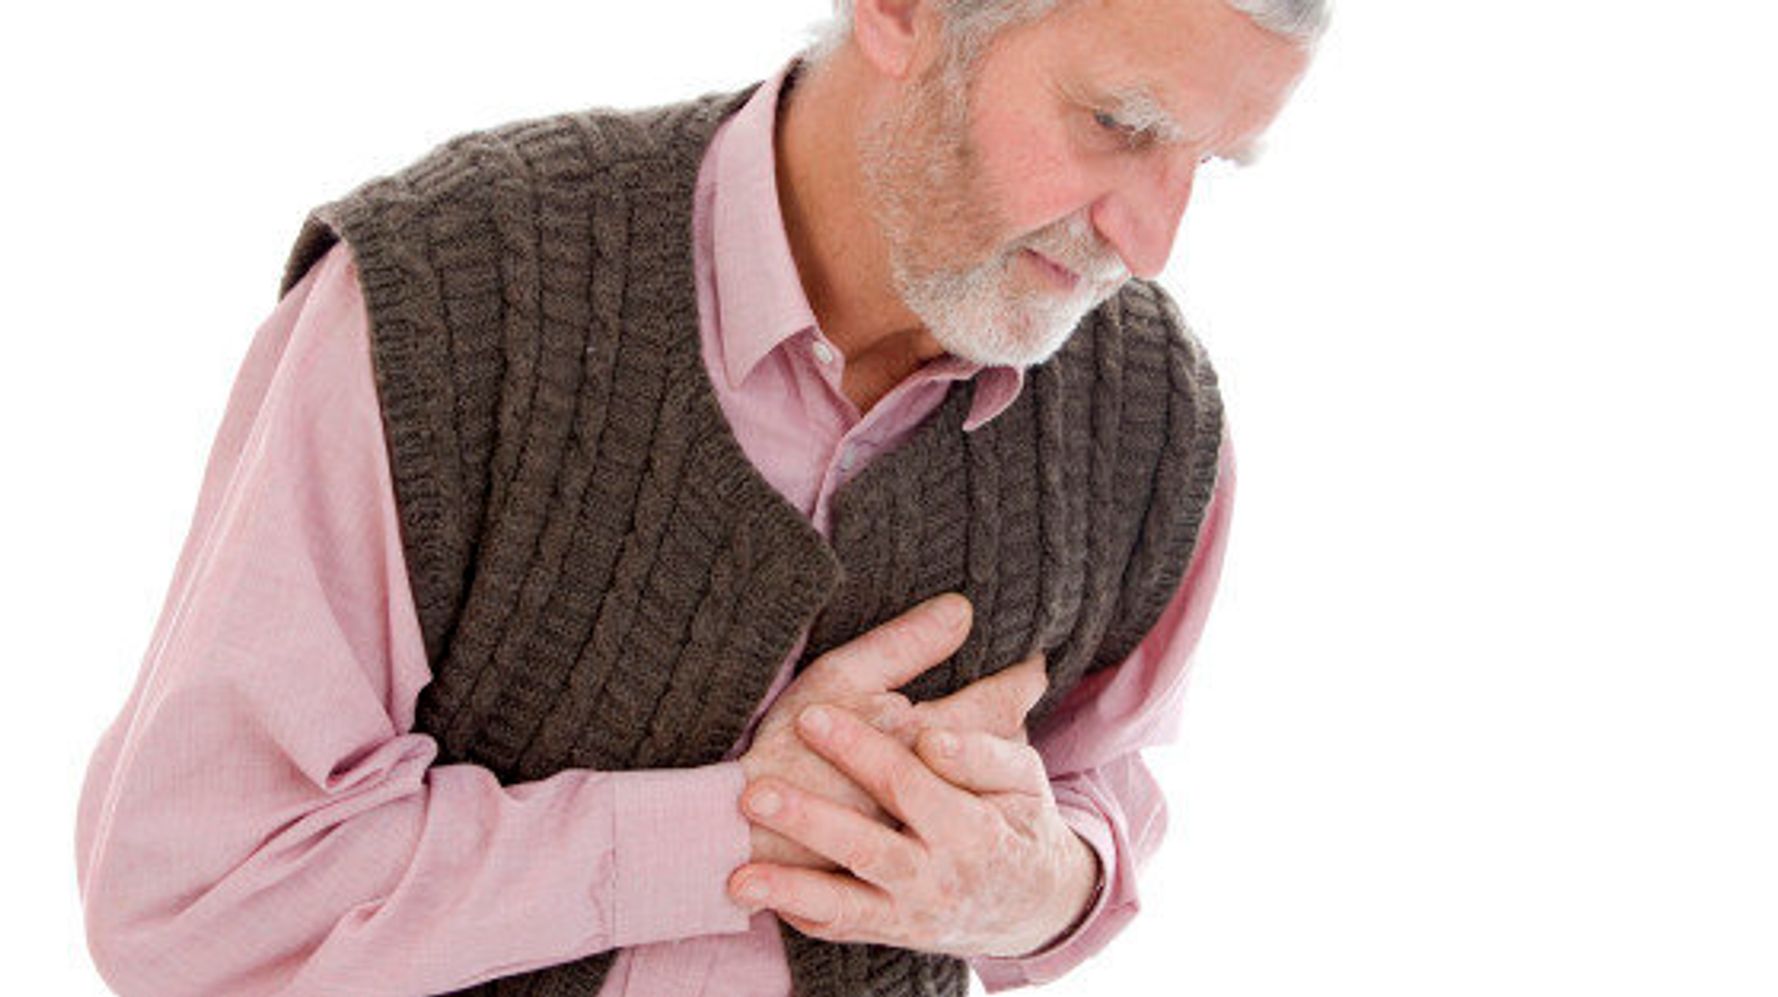 Top 5 Nutritional Tips to Decrease Your Risk of a Heart Attack